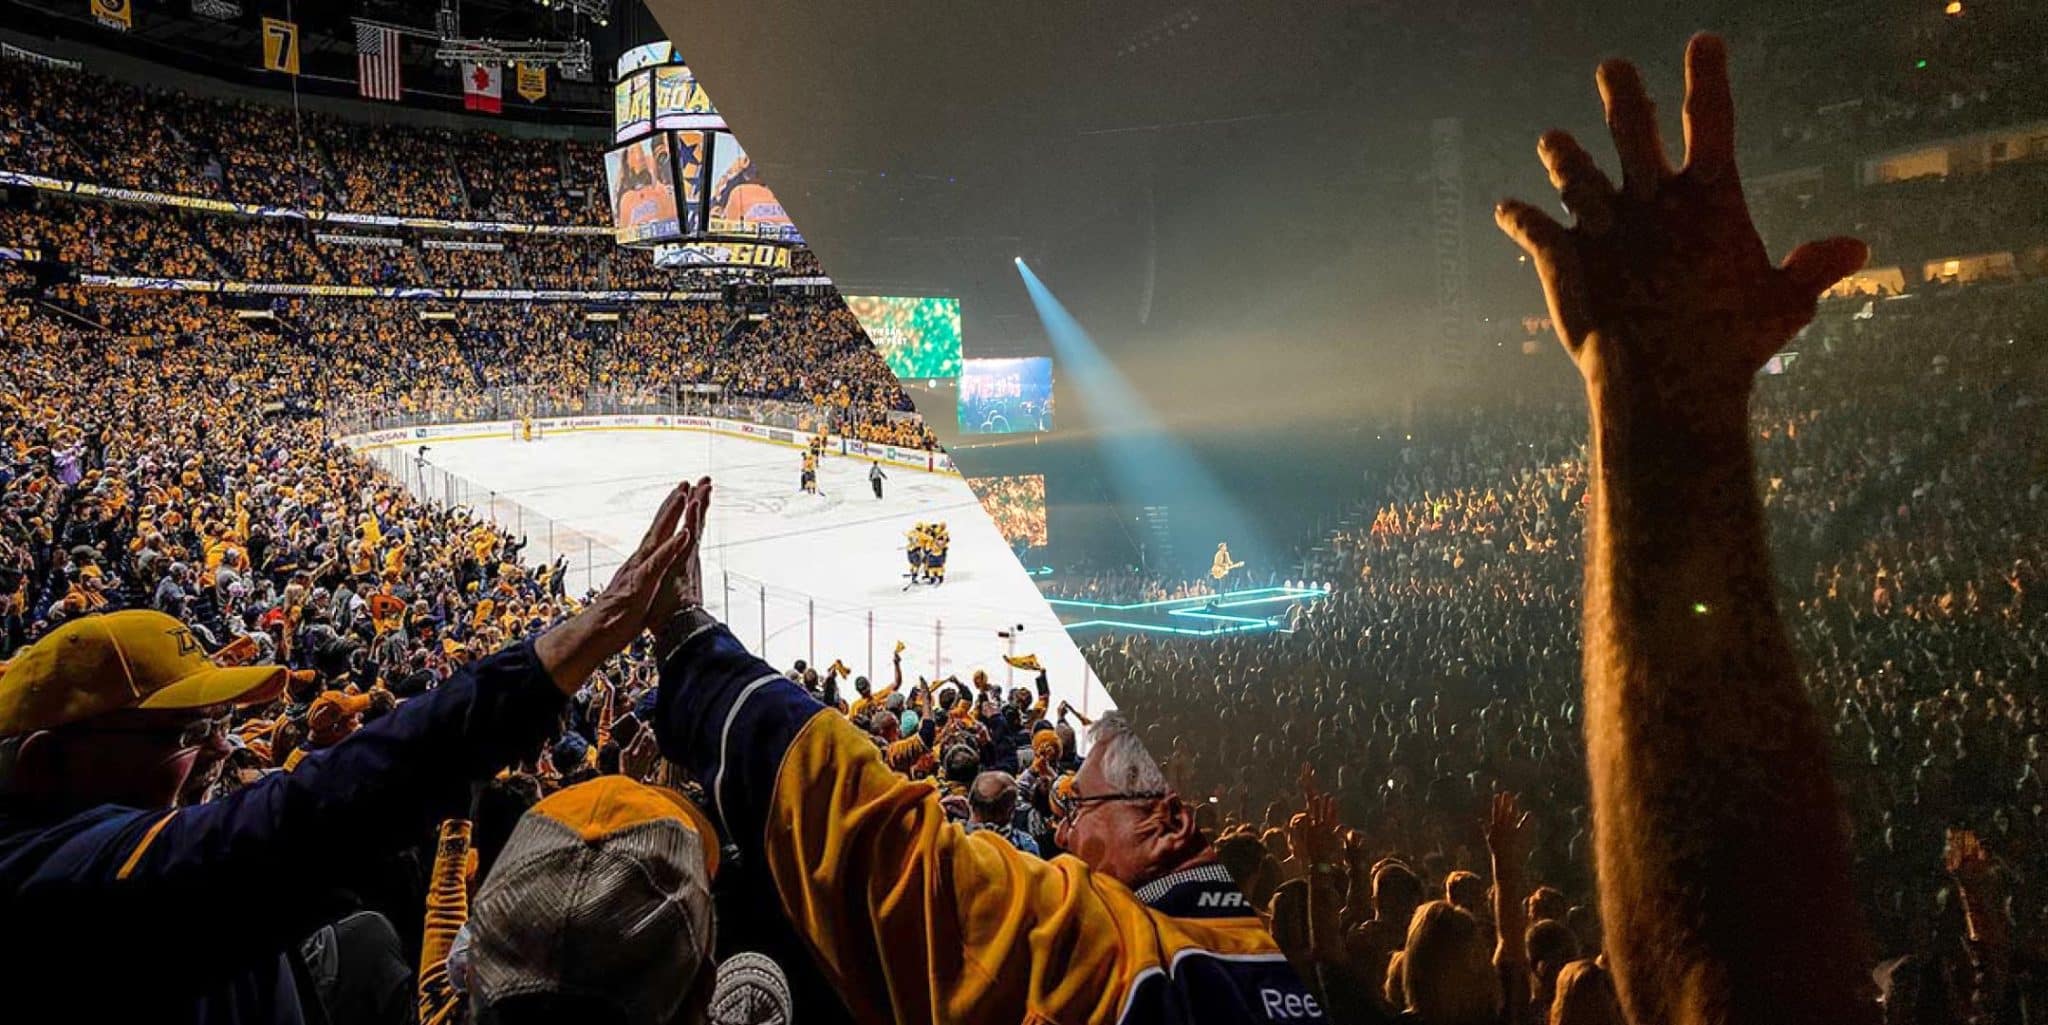 split-screen image of hockey game and worship concert in arena